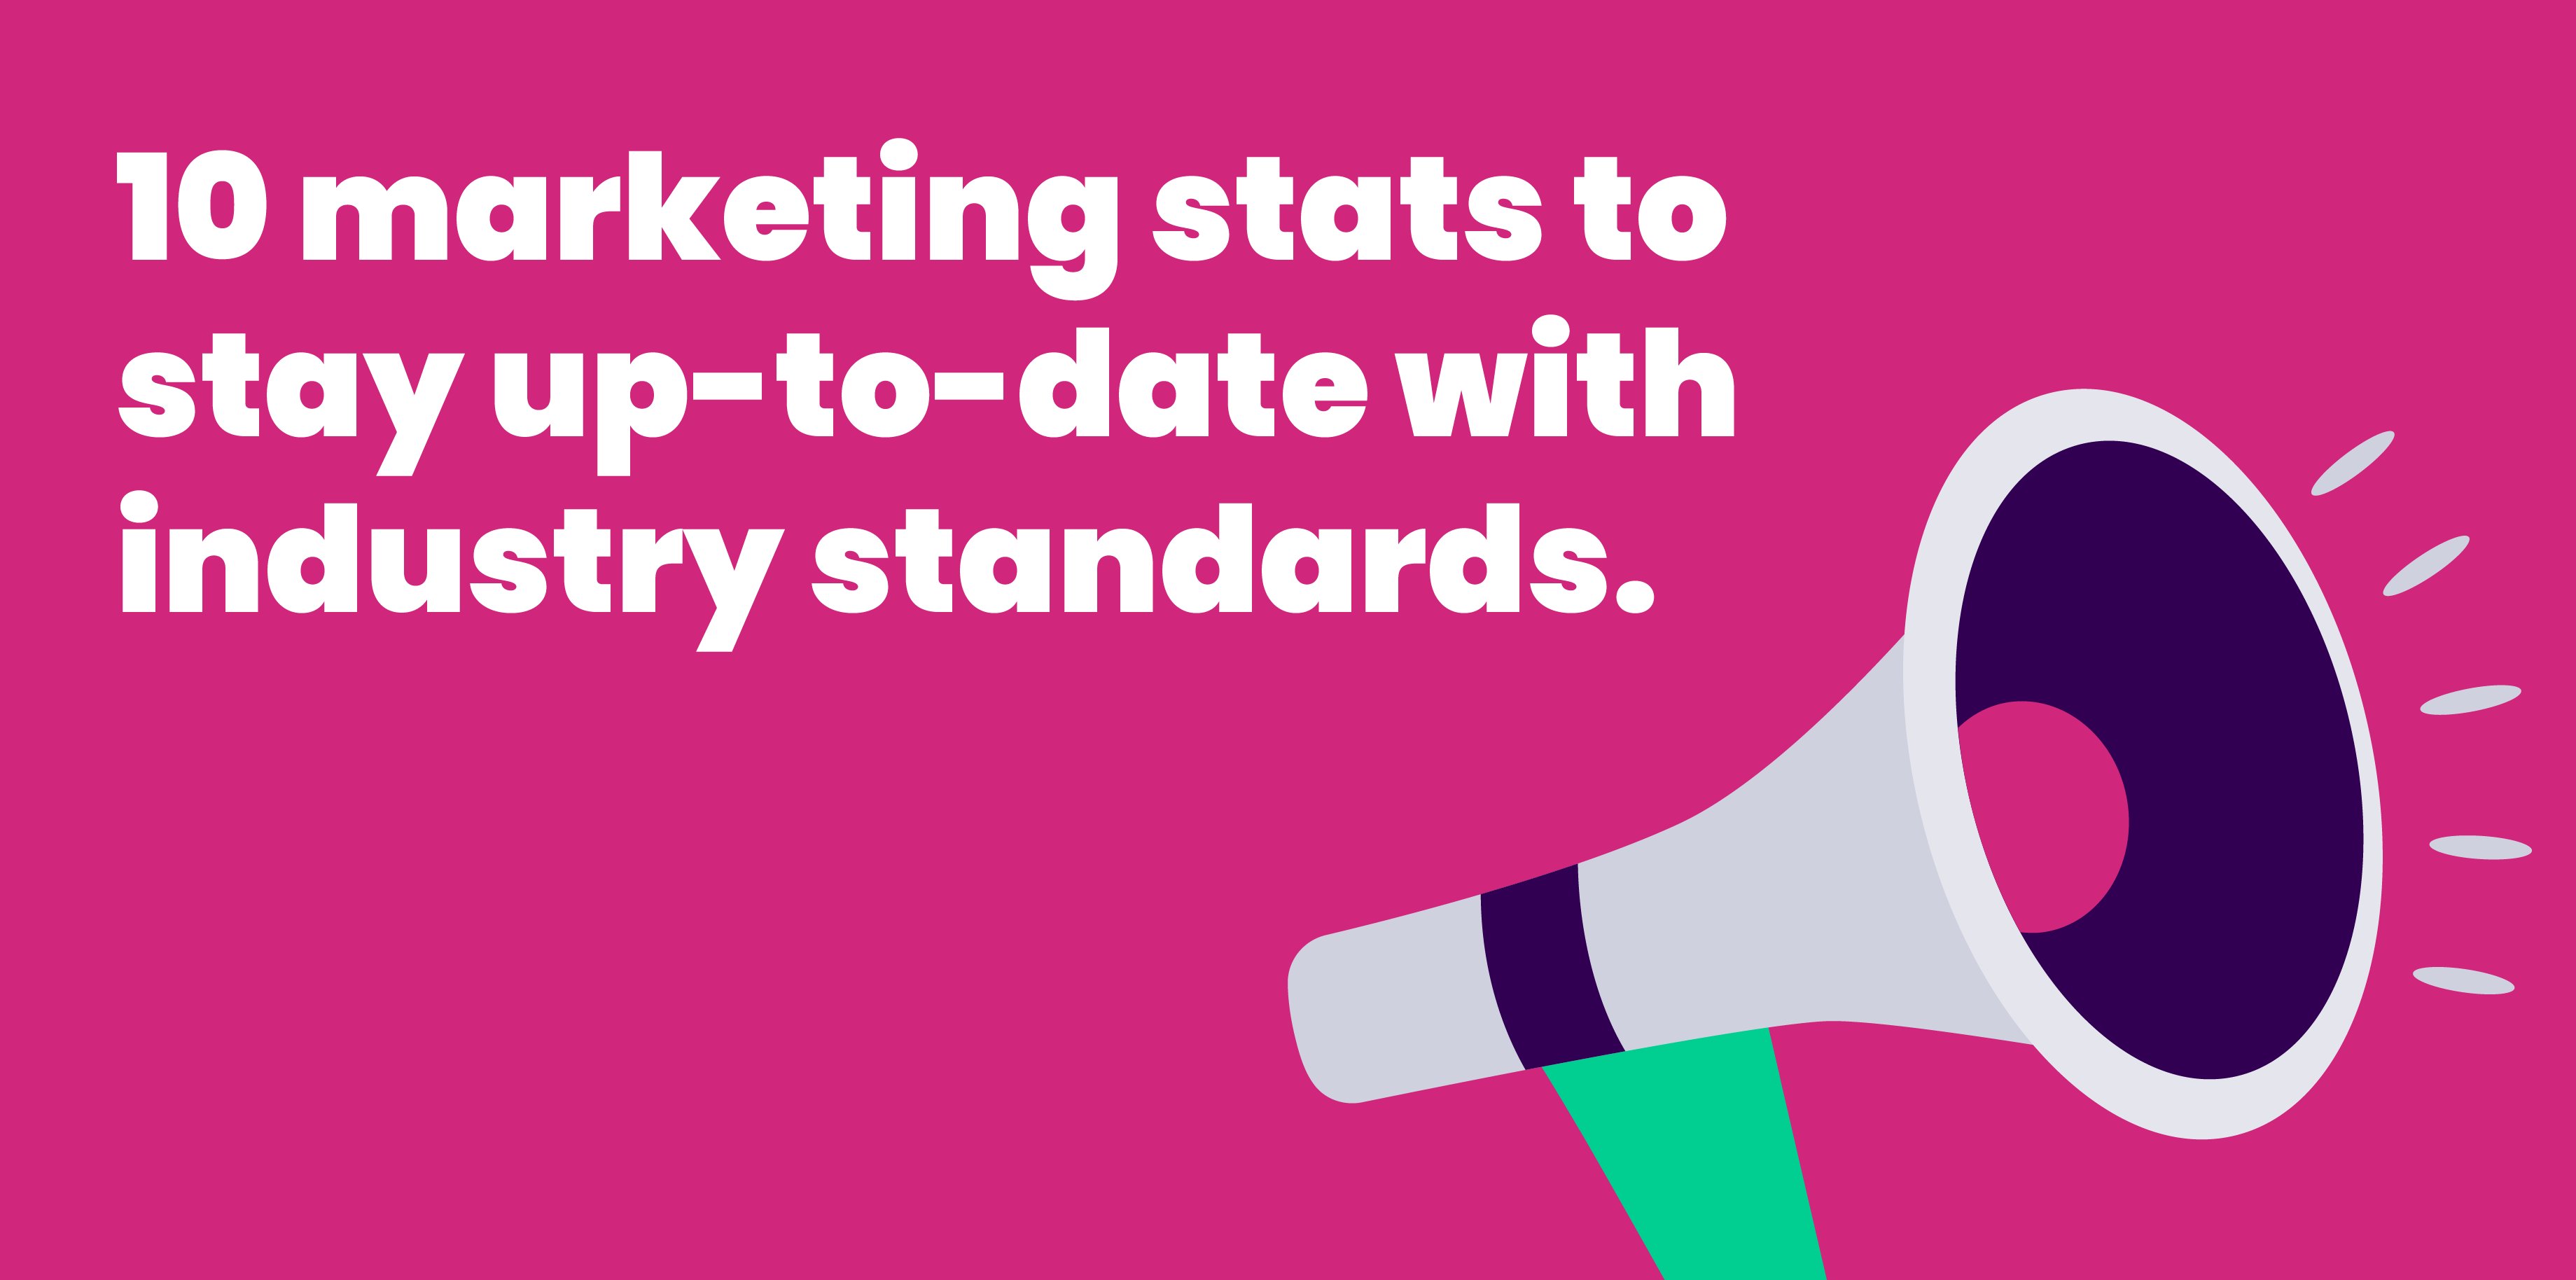 10 marketing stats tostay up-to-date withindustry standards@3x